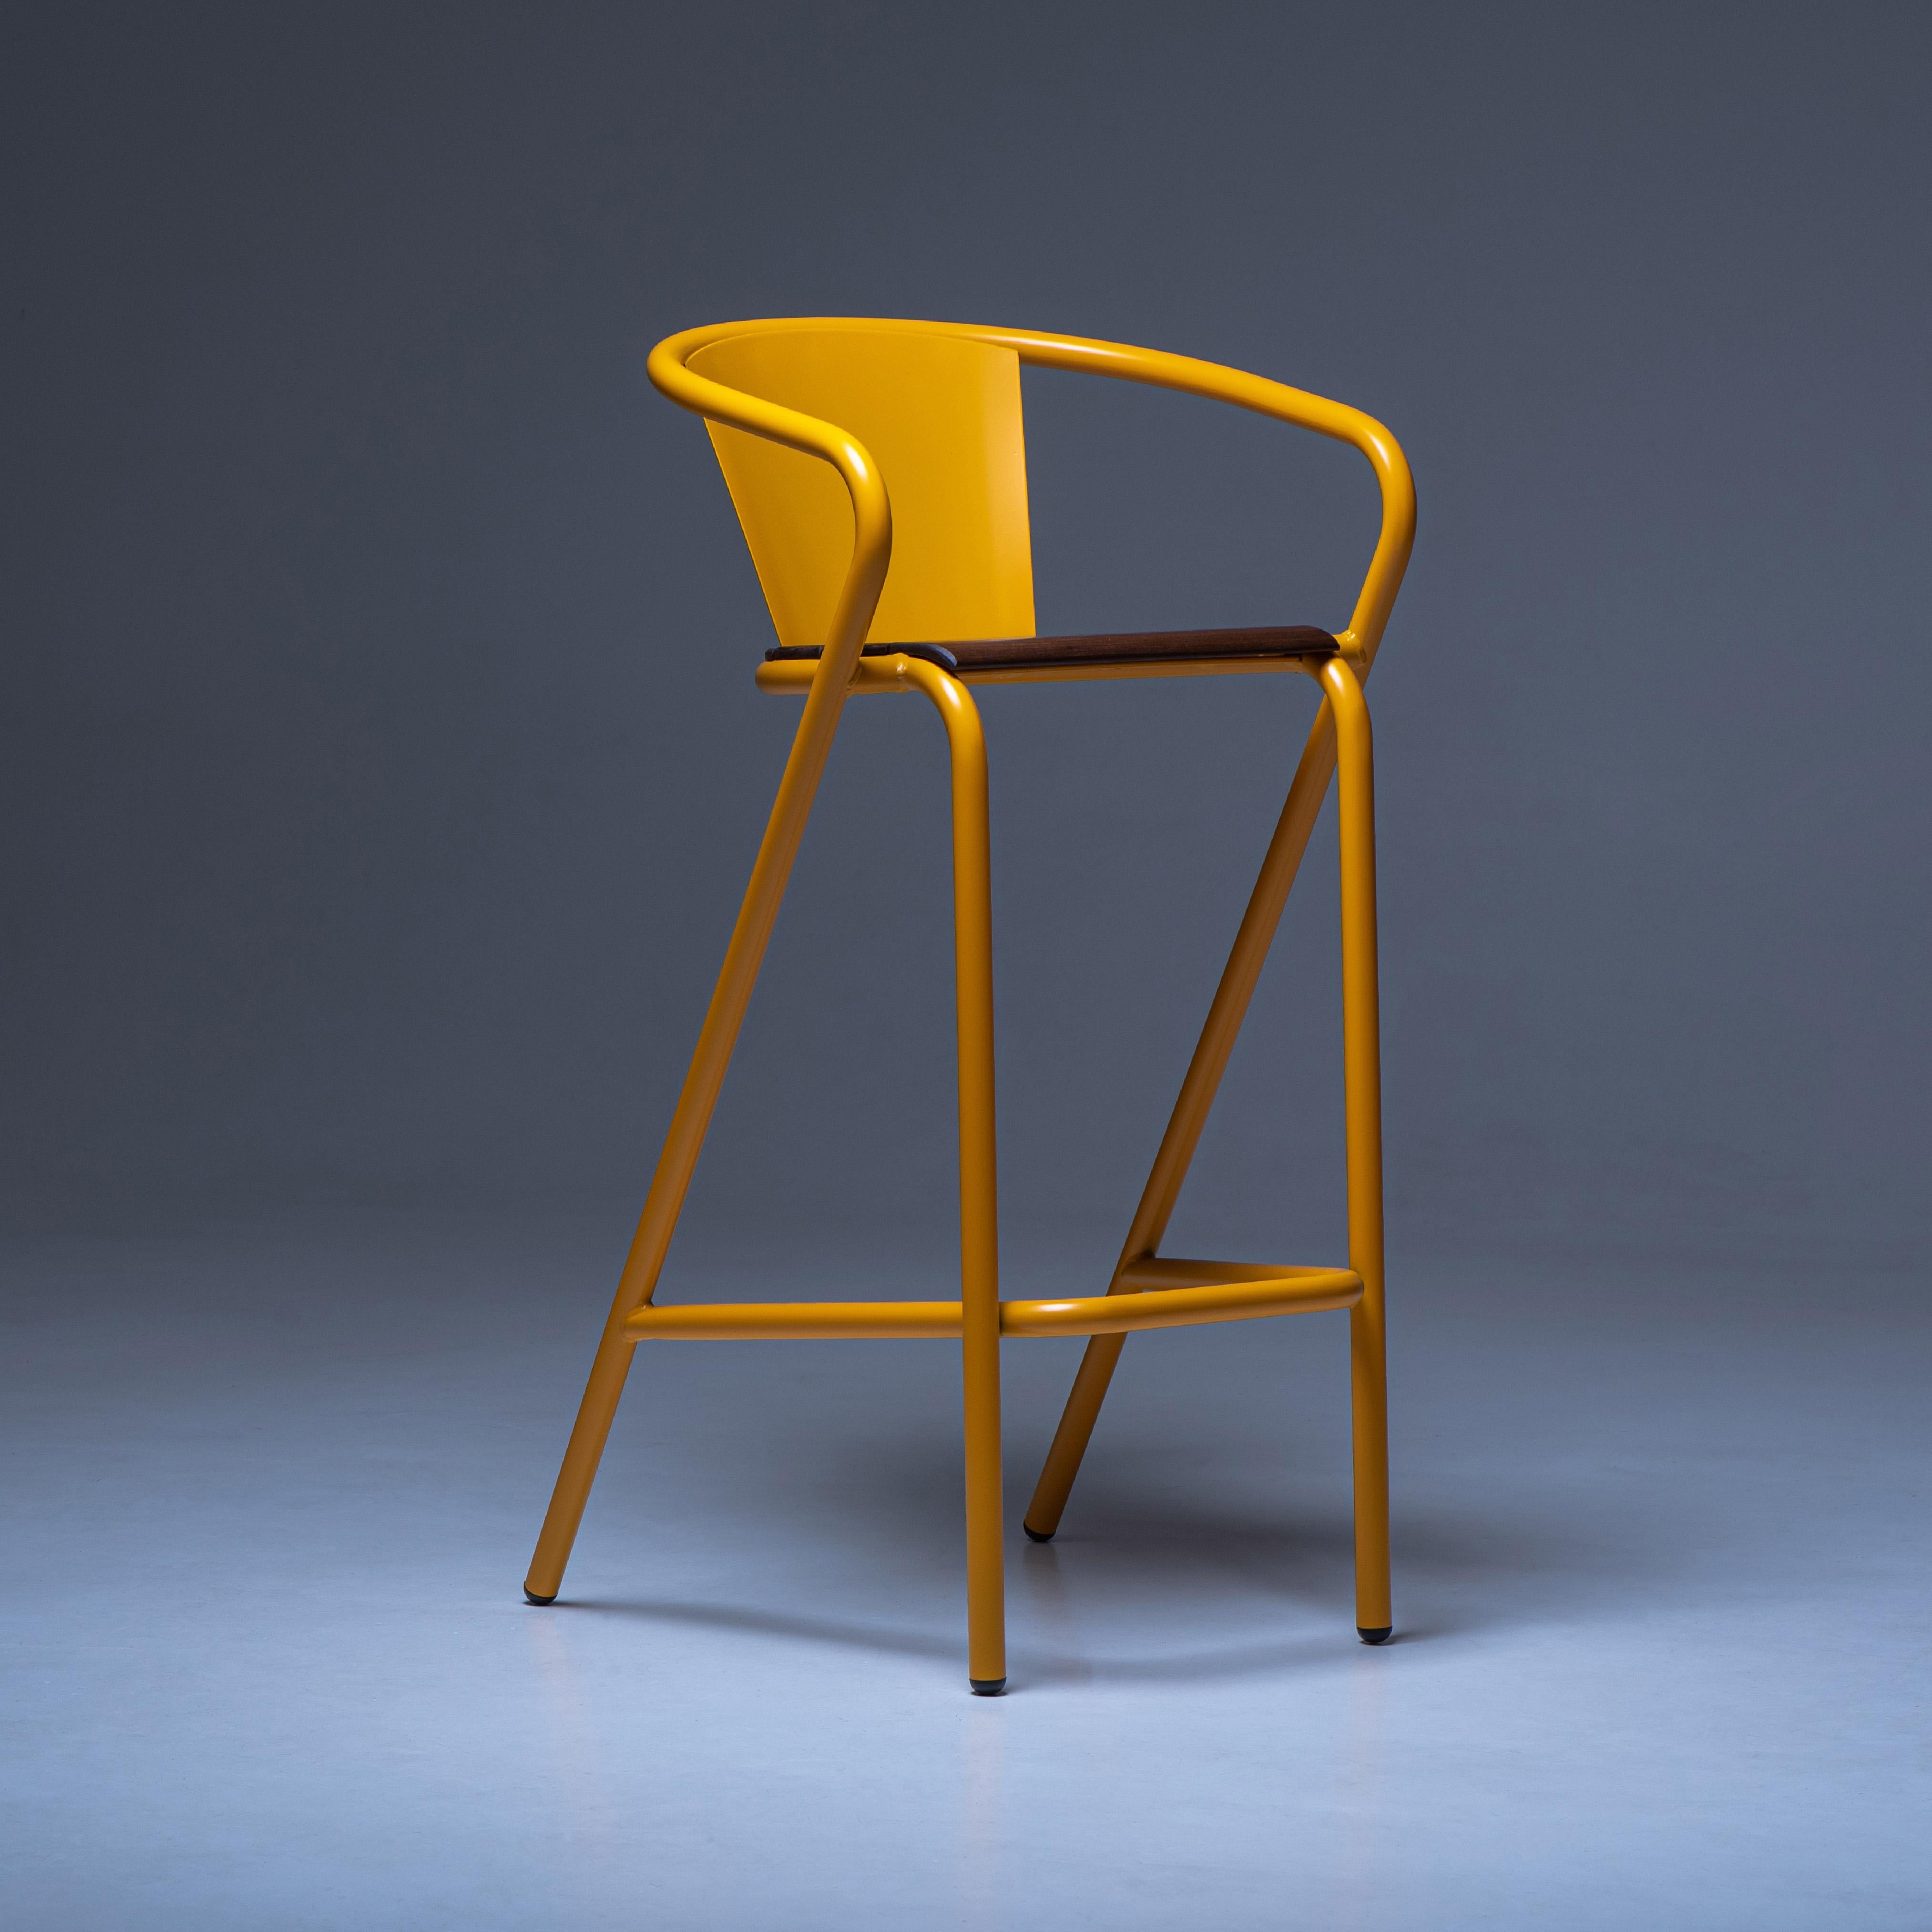 BICAstool is a sustainable stackable steel high stool chair made for the outdoors from recycled and recyclable steel and finished with our premium selection of powder-coating colors, in this case in a bright yellow color, that transforms a Classic